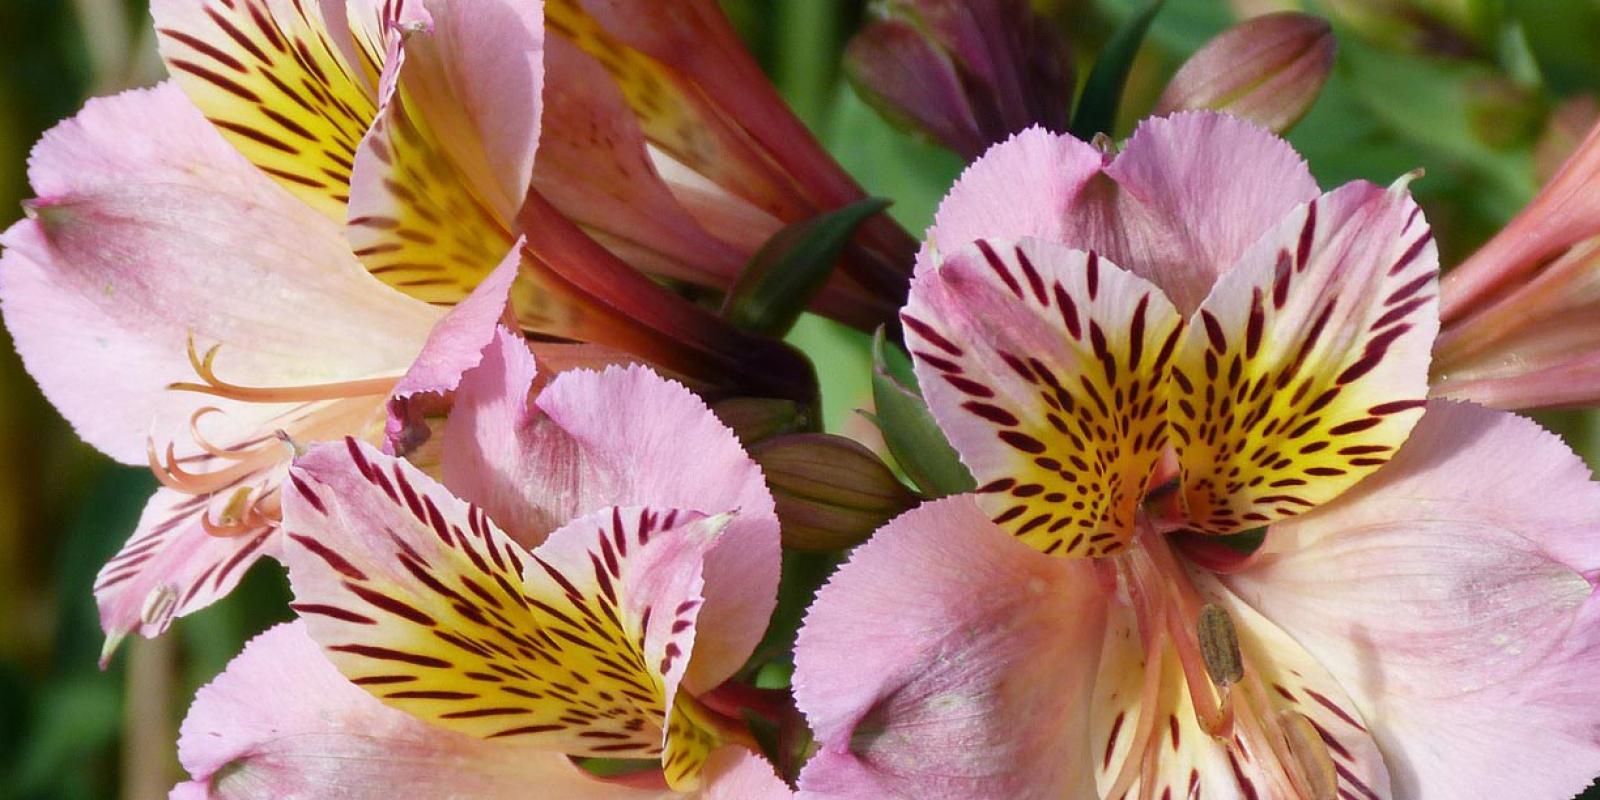 The most beautiful Alstroemeria from Together2Grow